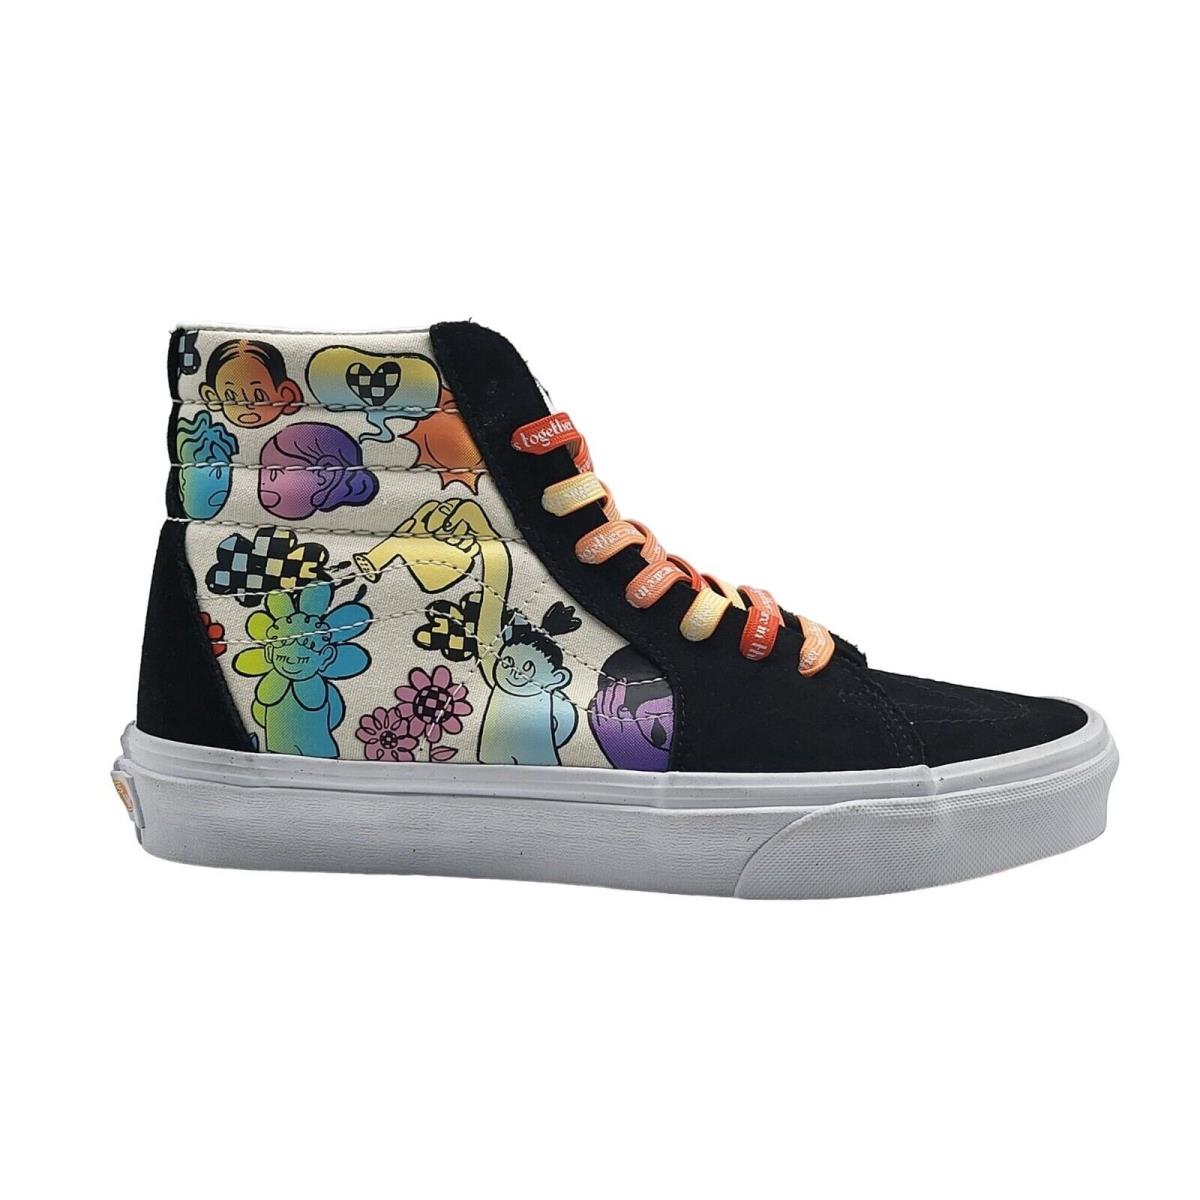 Vans Sk8 Hi Cultivate Care In This Together Shoes Size 8.5 Men 10 Women